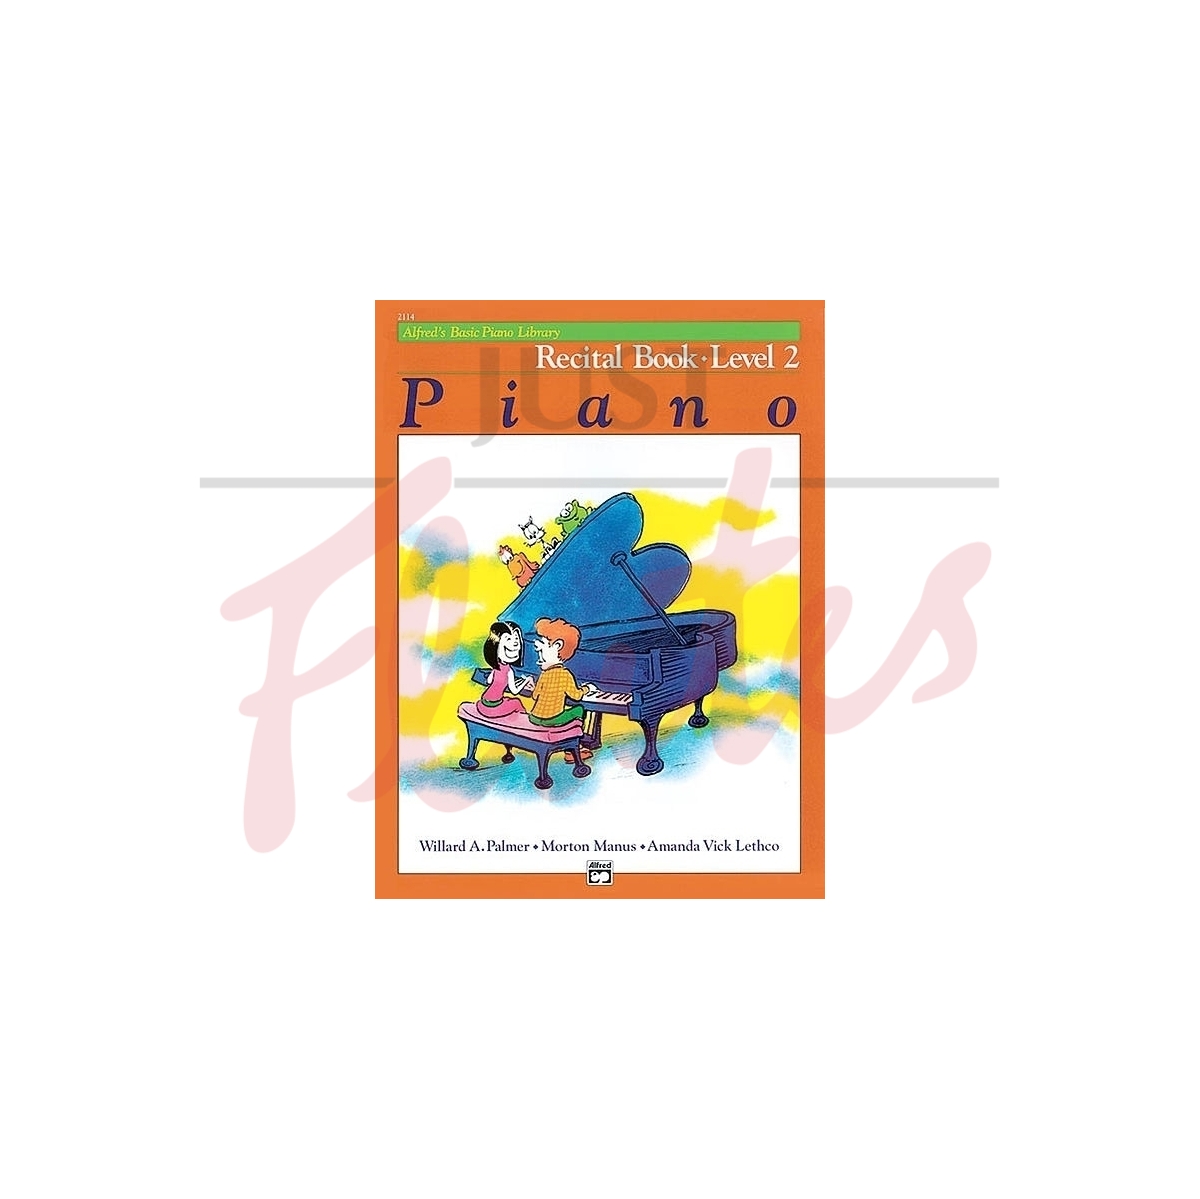 Alfred's Basic Piano Library: Recital Book Level 2